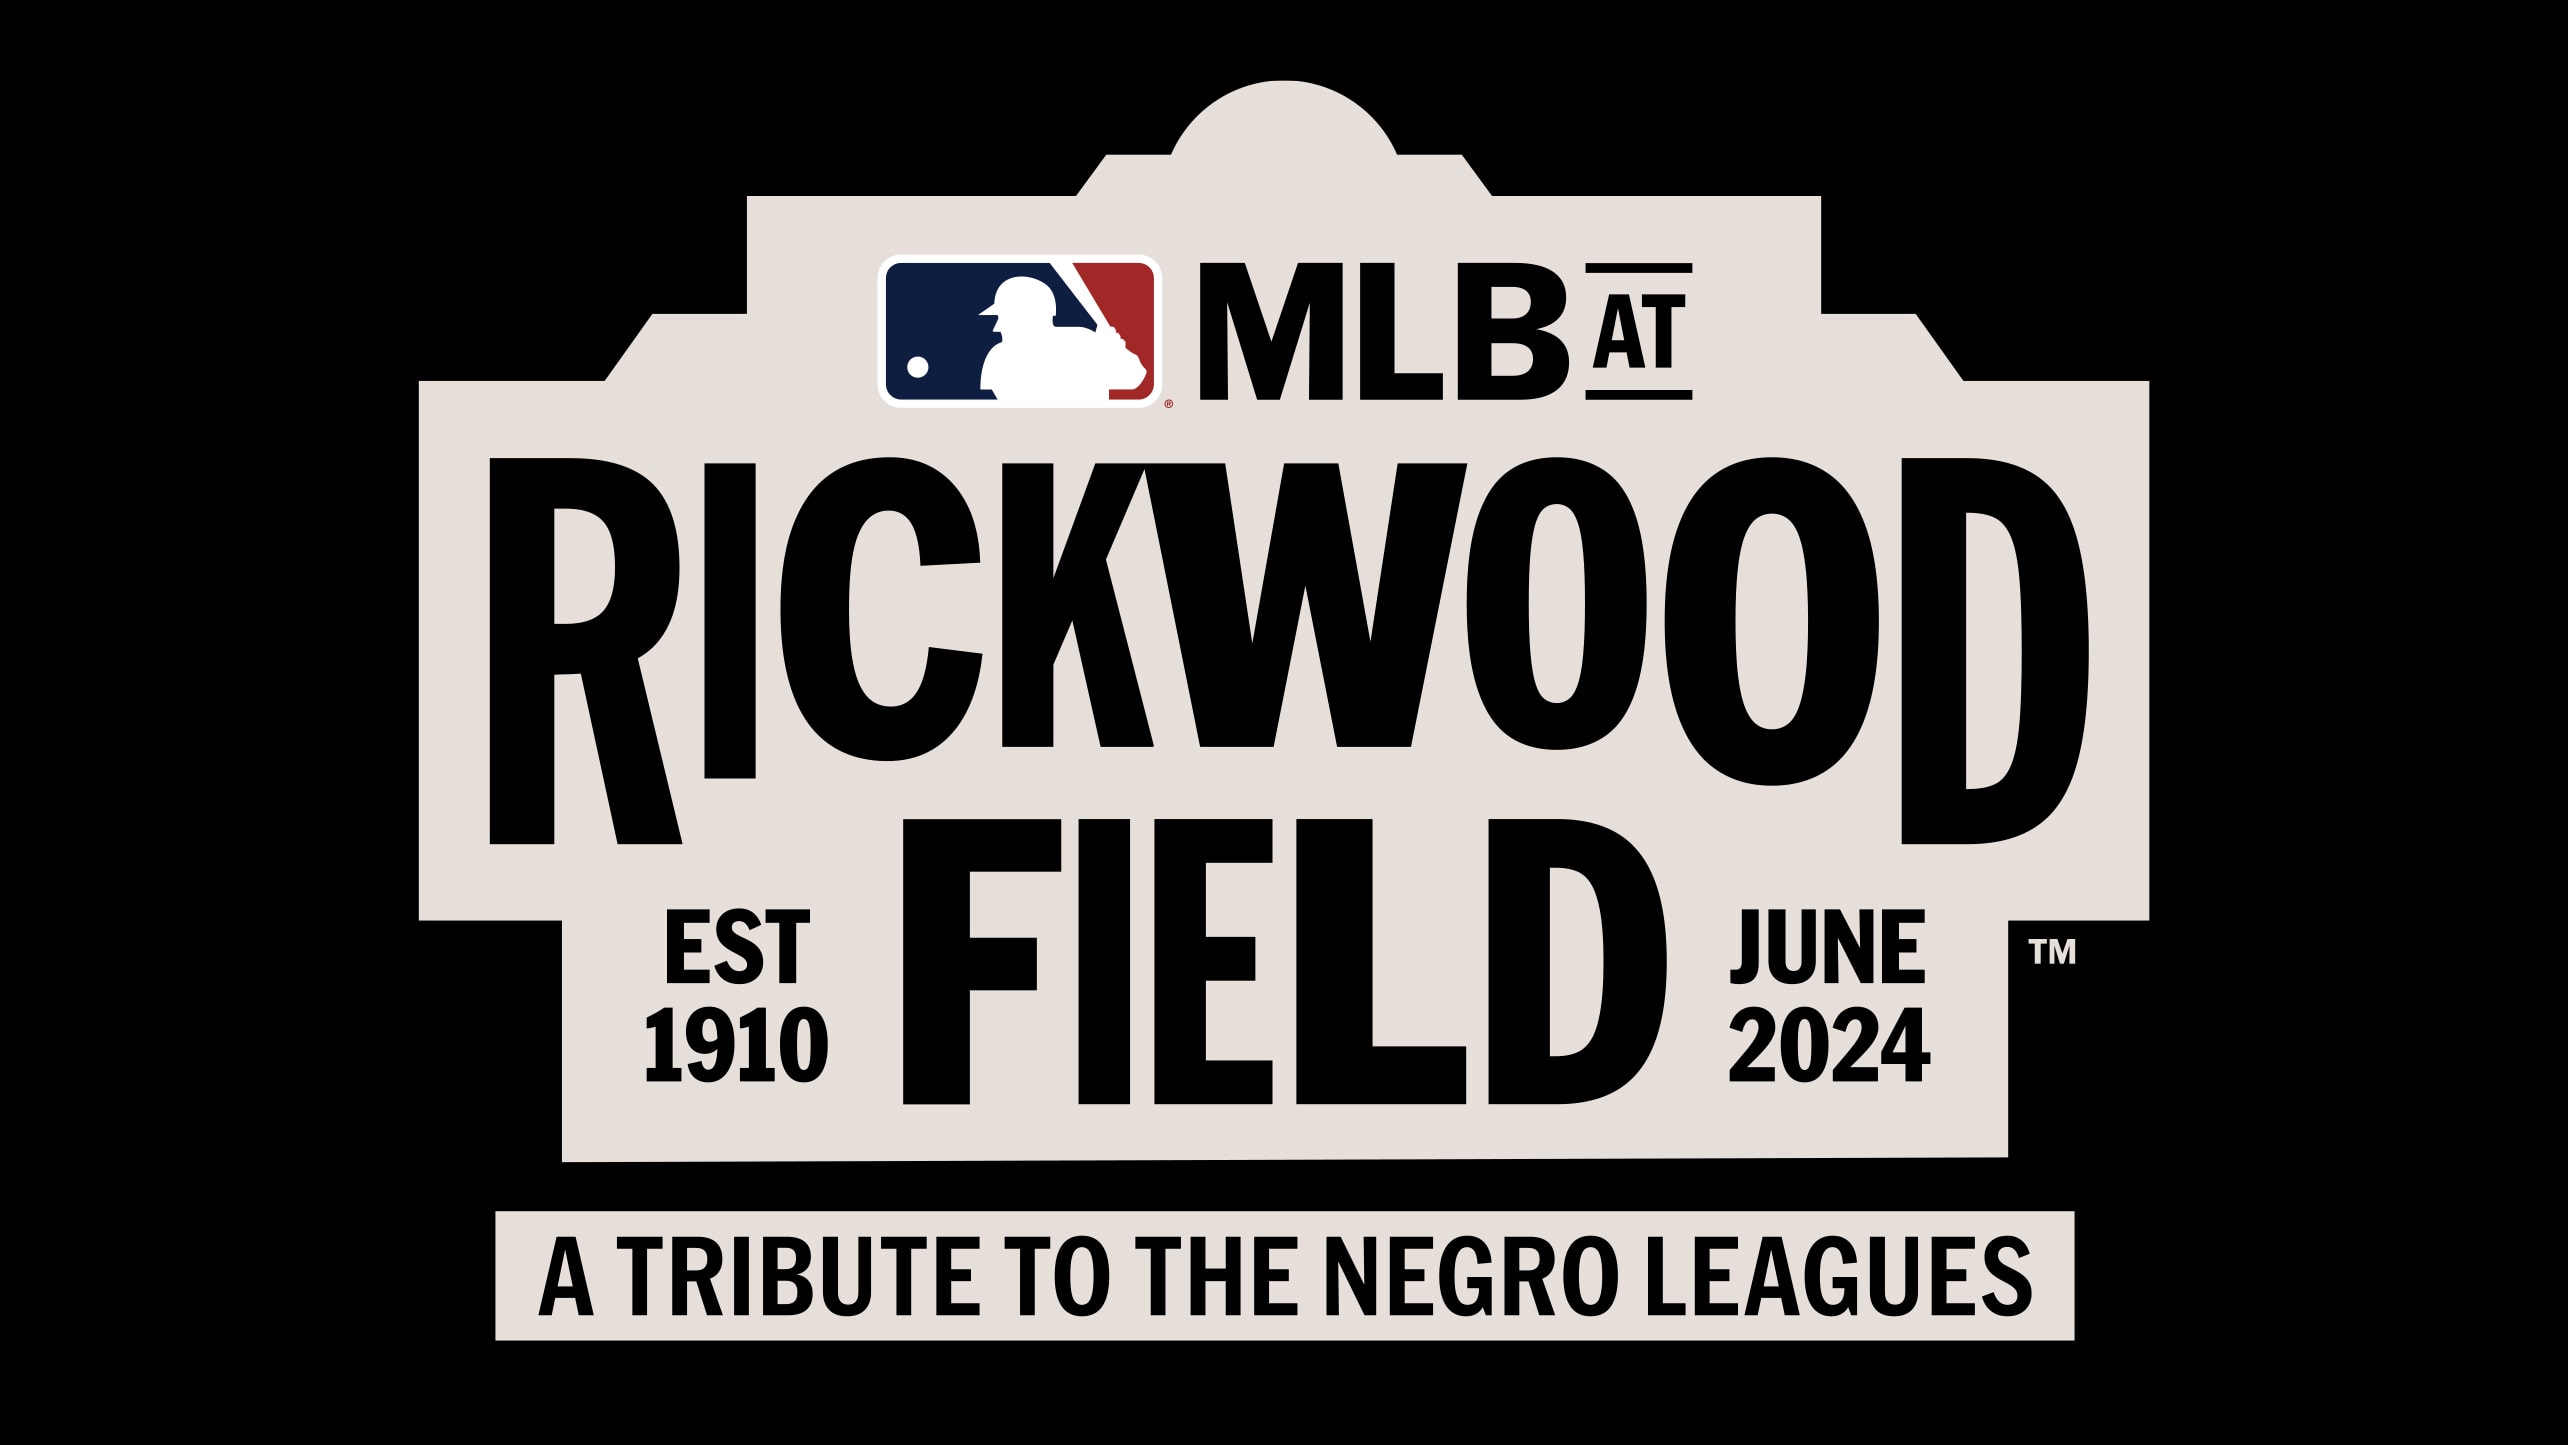 MLB Network is live from Rickwood Field today